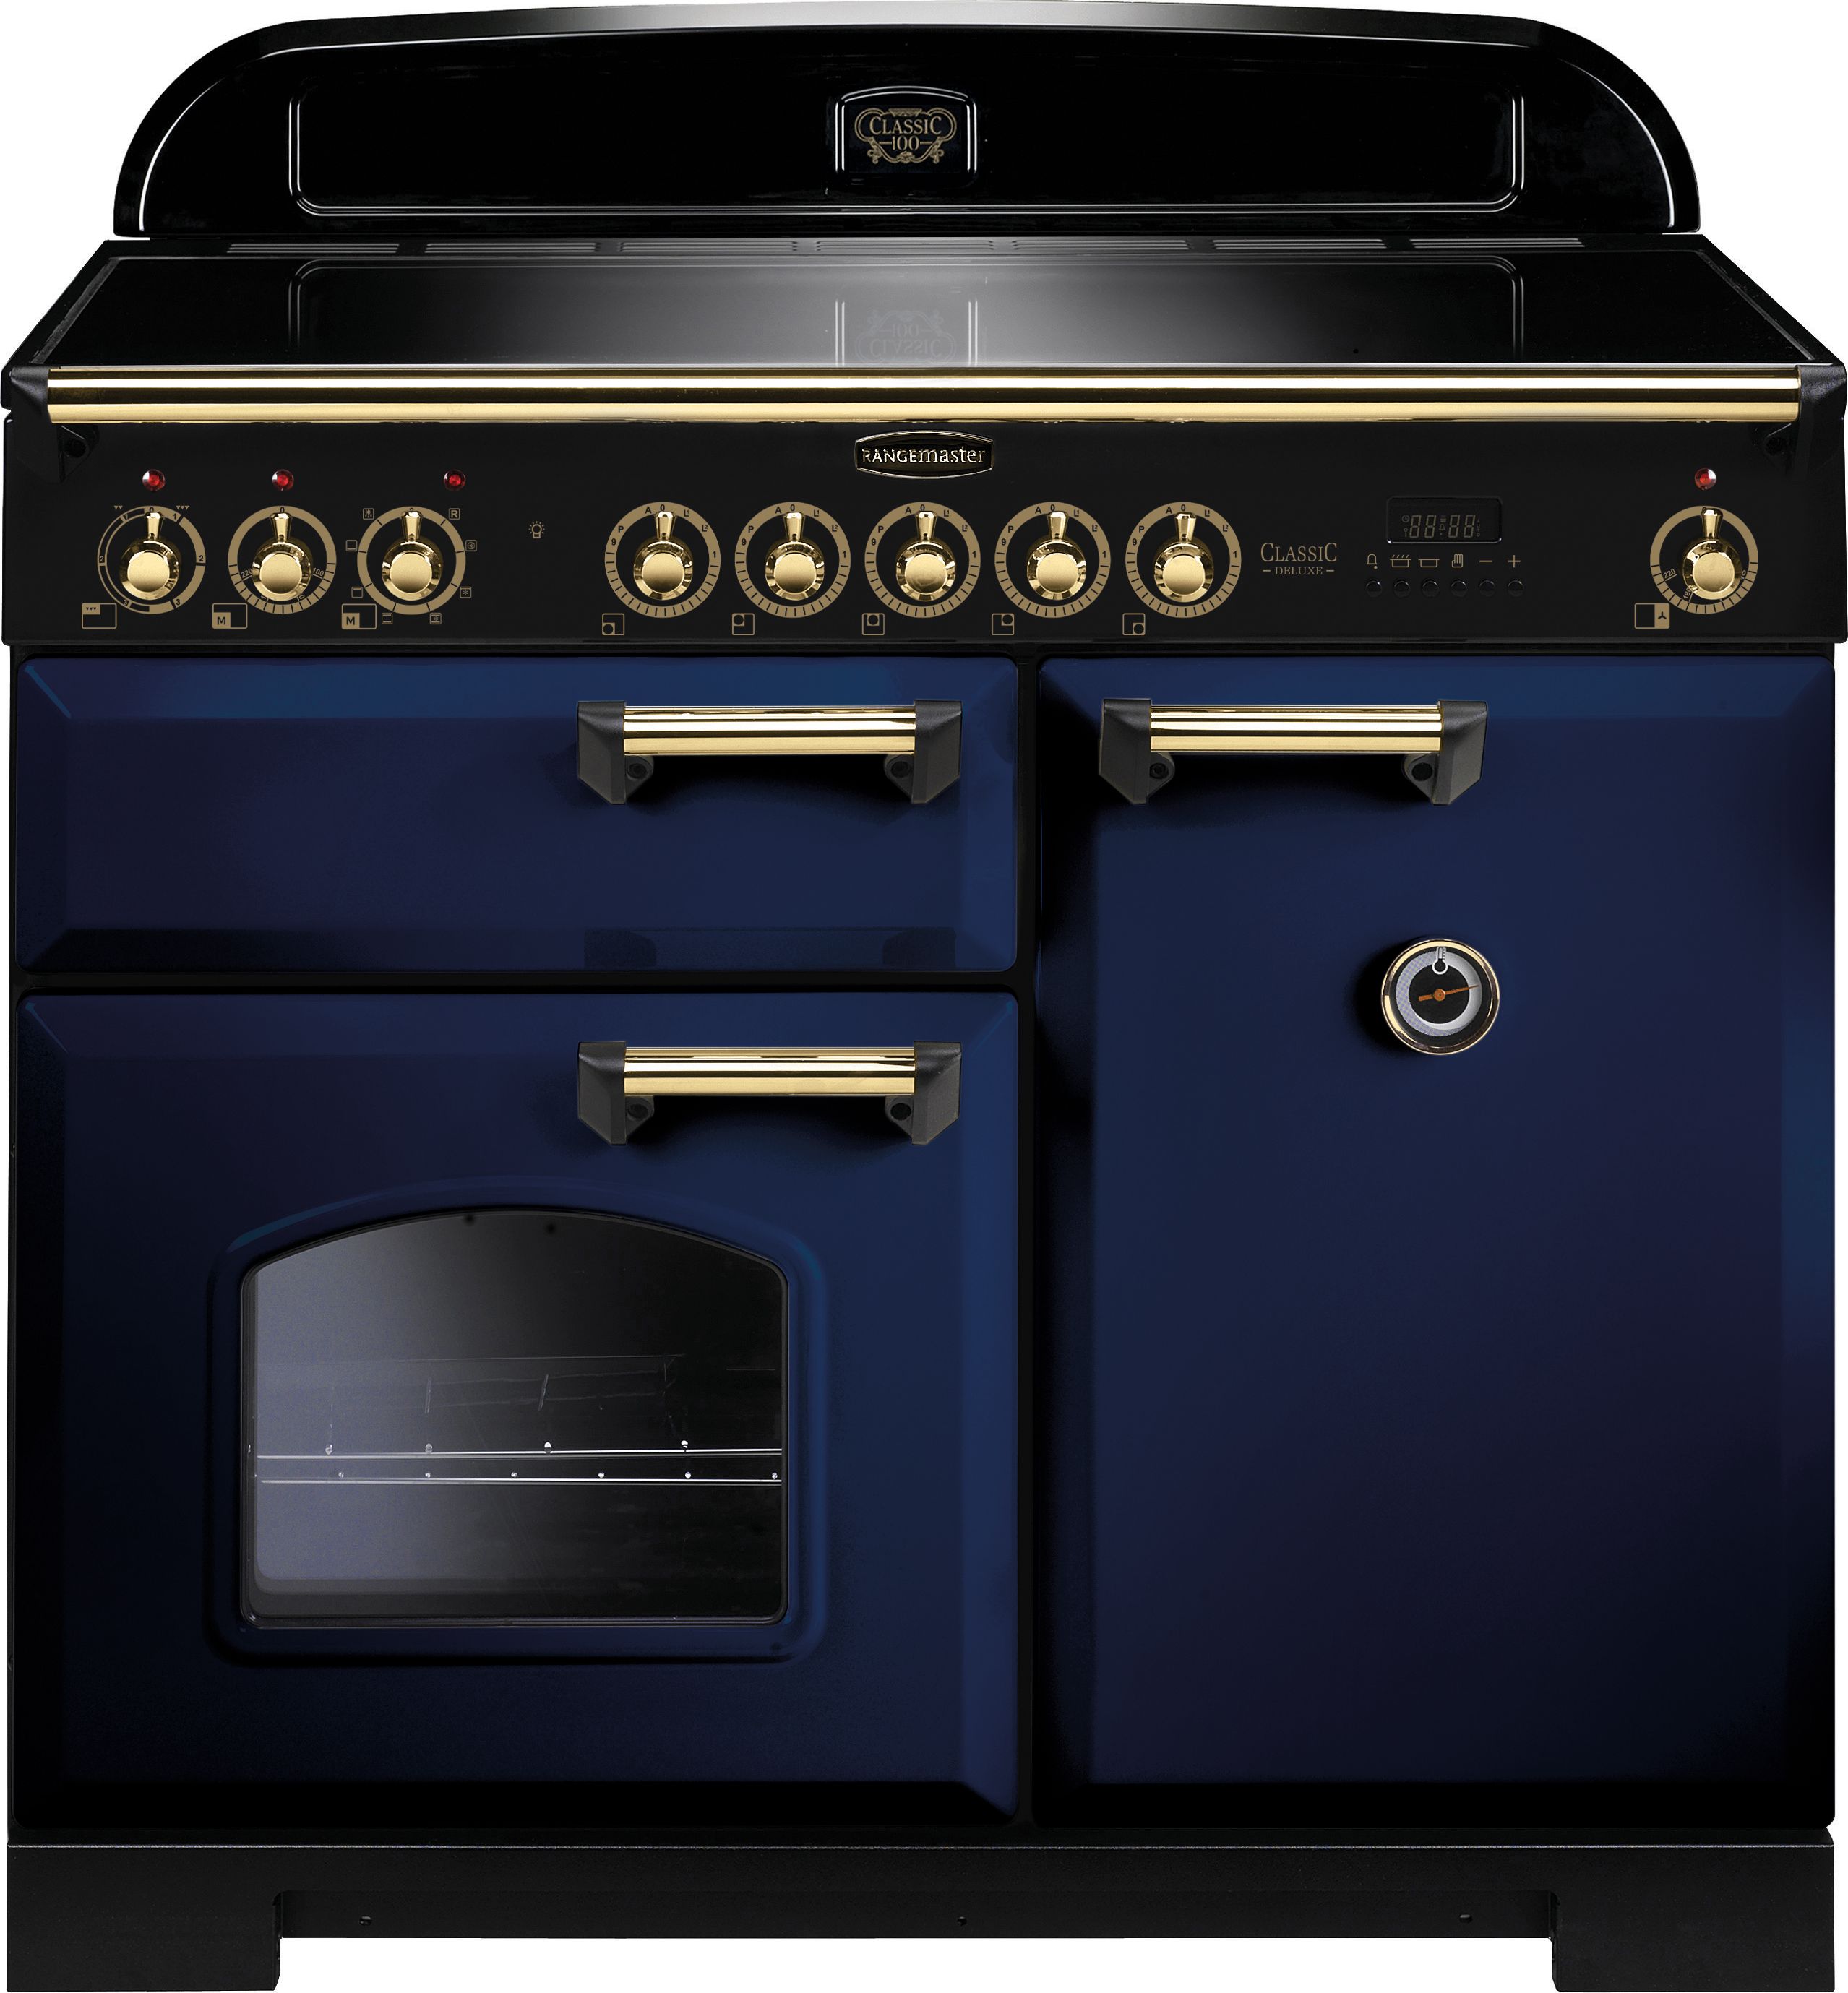 Rangemaster Classic Deluxe CDL100EIRB/B 100cm Electric Range Cooker with Induction Hob - Regal Blue / Brass - A/A Rated, Blue